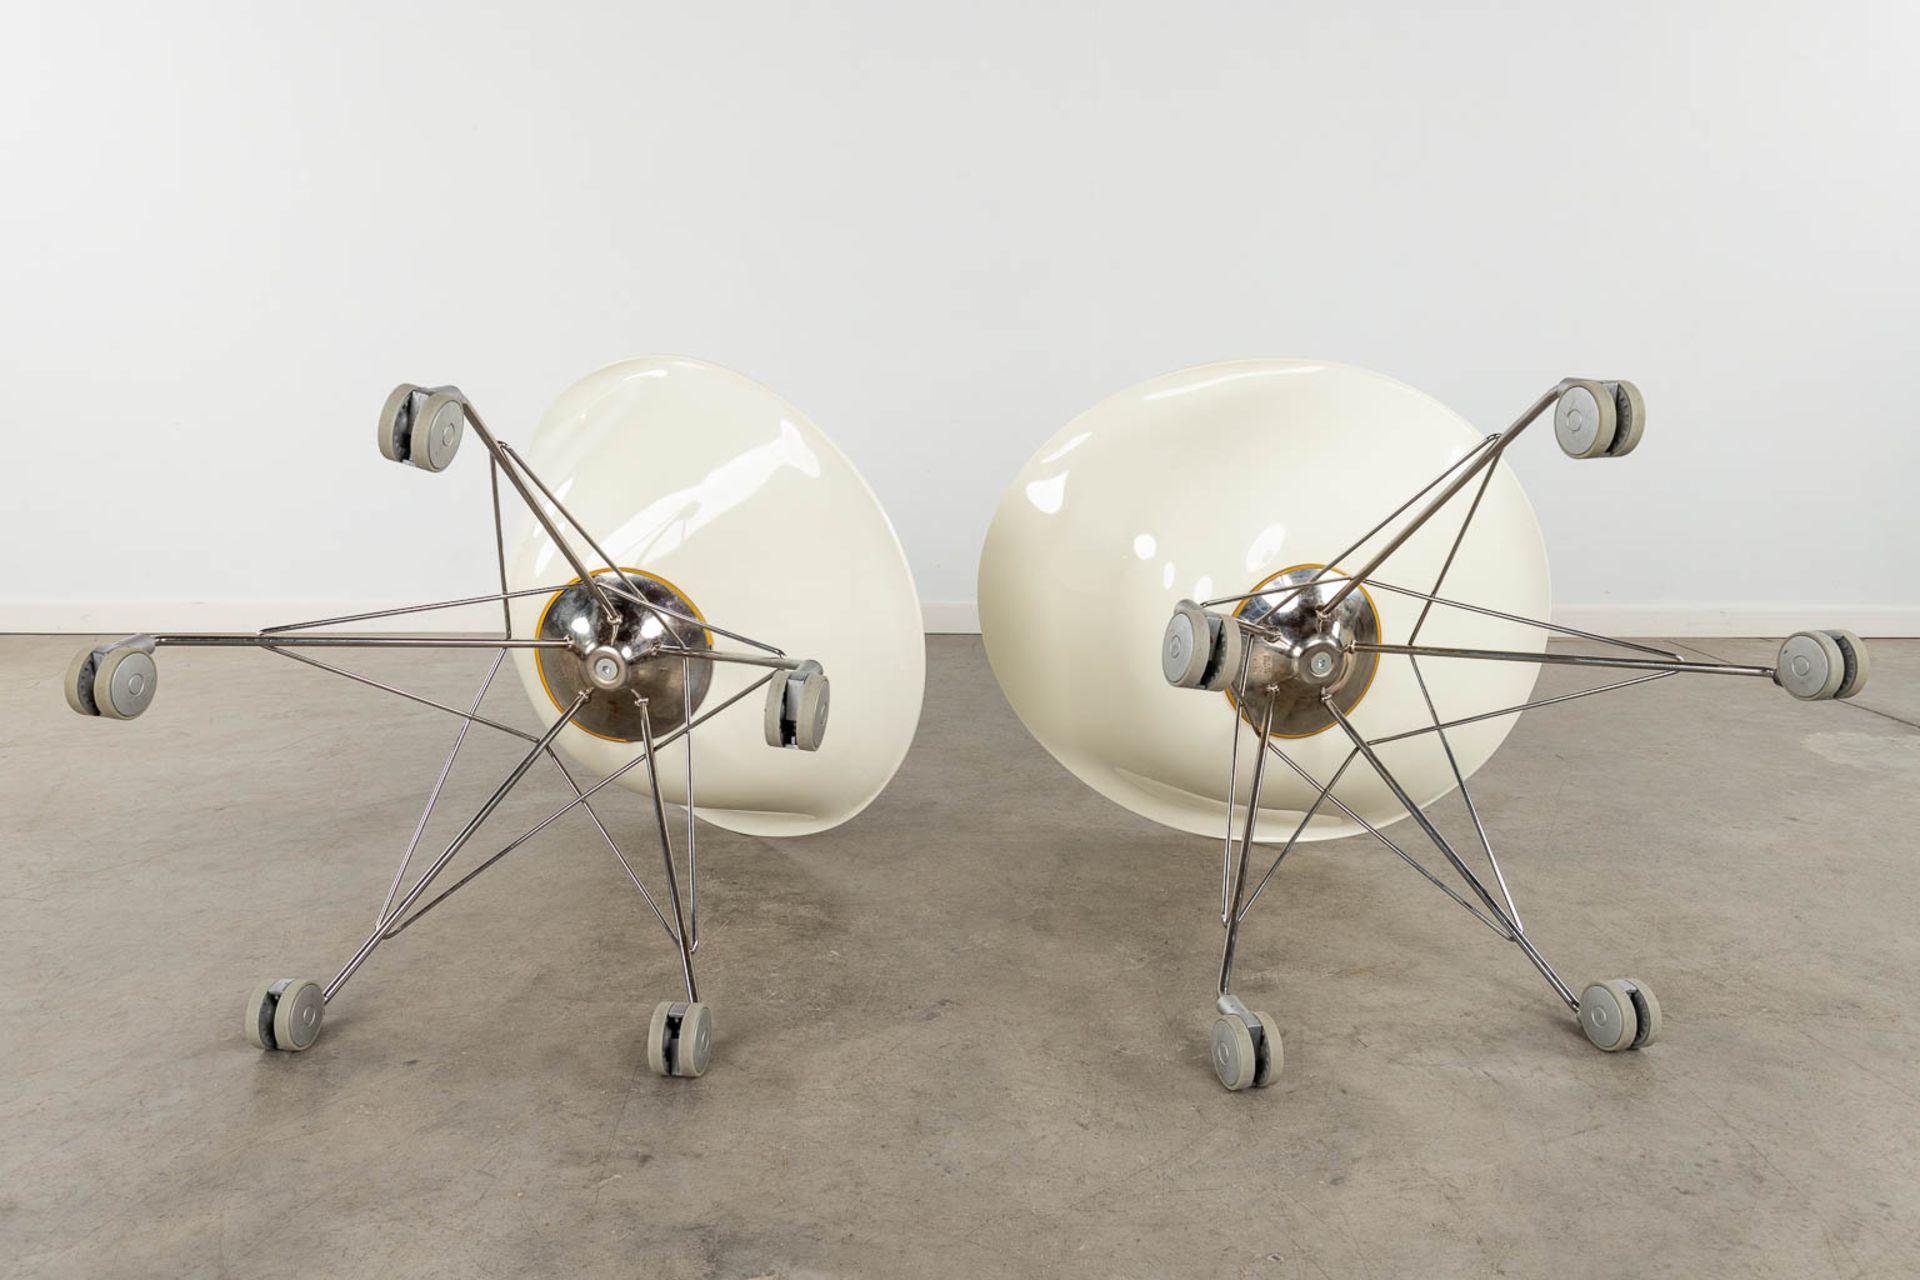 Philippe STARCK (1949) 'Ero' for Kartell, two office chairs. (D:59 x W:62 x H:82 cm) - Image 10 of 14